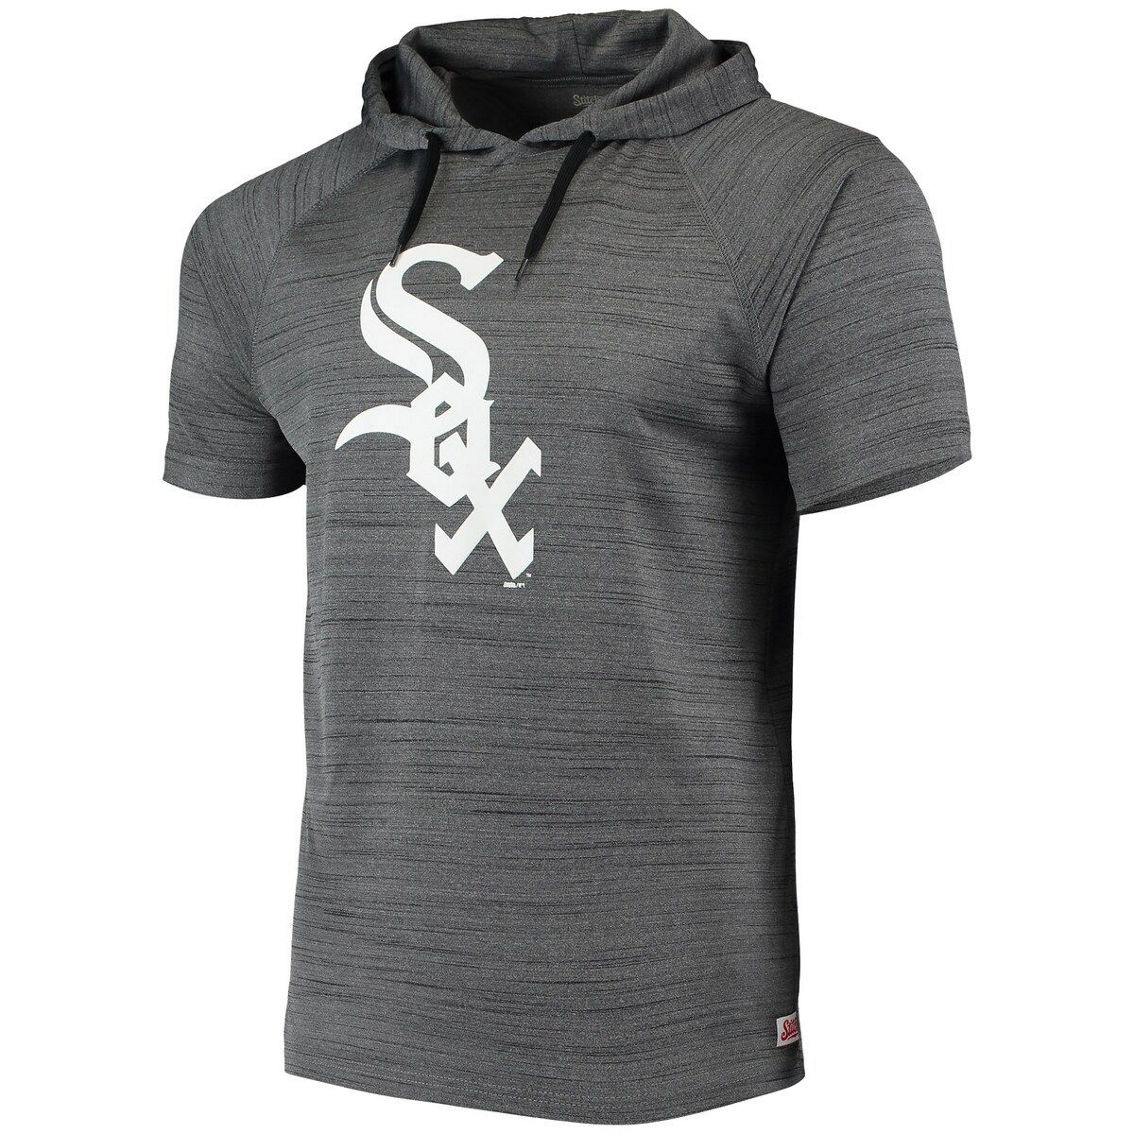 Stitches Men's Heathered Black Chicago White Sox Raglan Short Sleeve Pullover Hoodie - Image 3 of 4